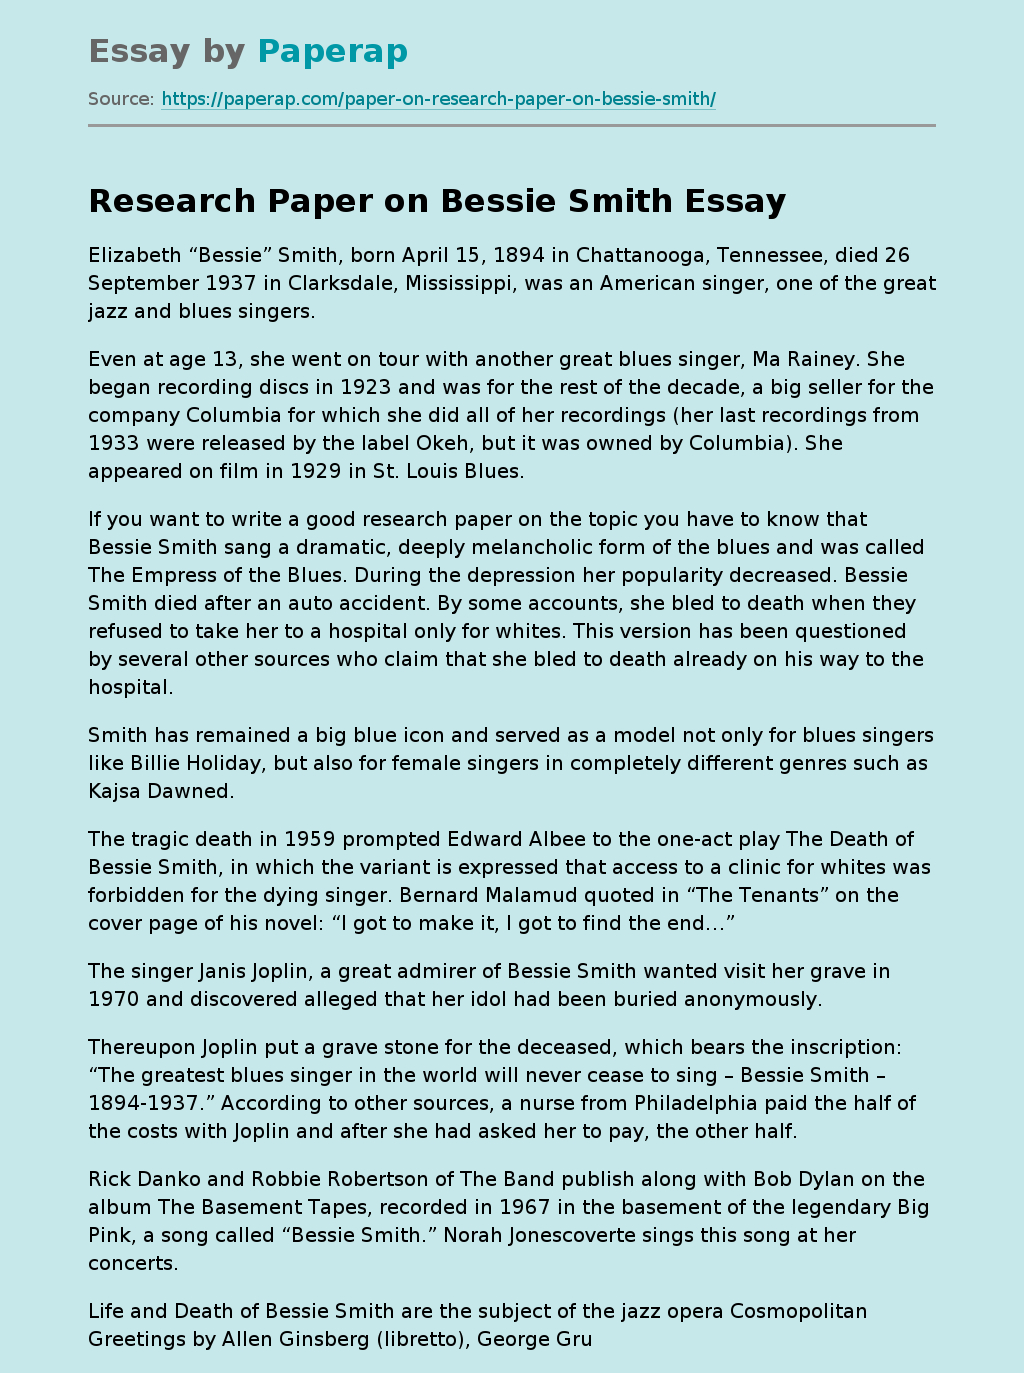 Research Paper on Bessie Smith